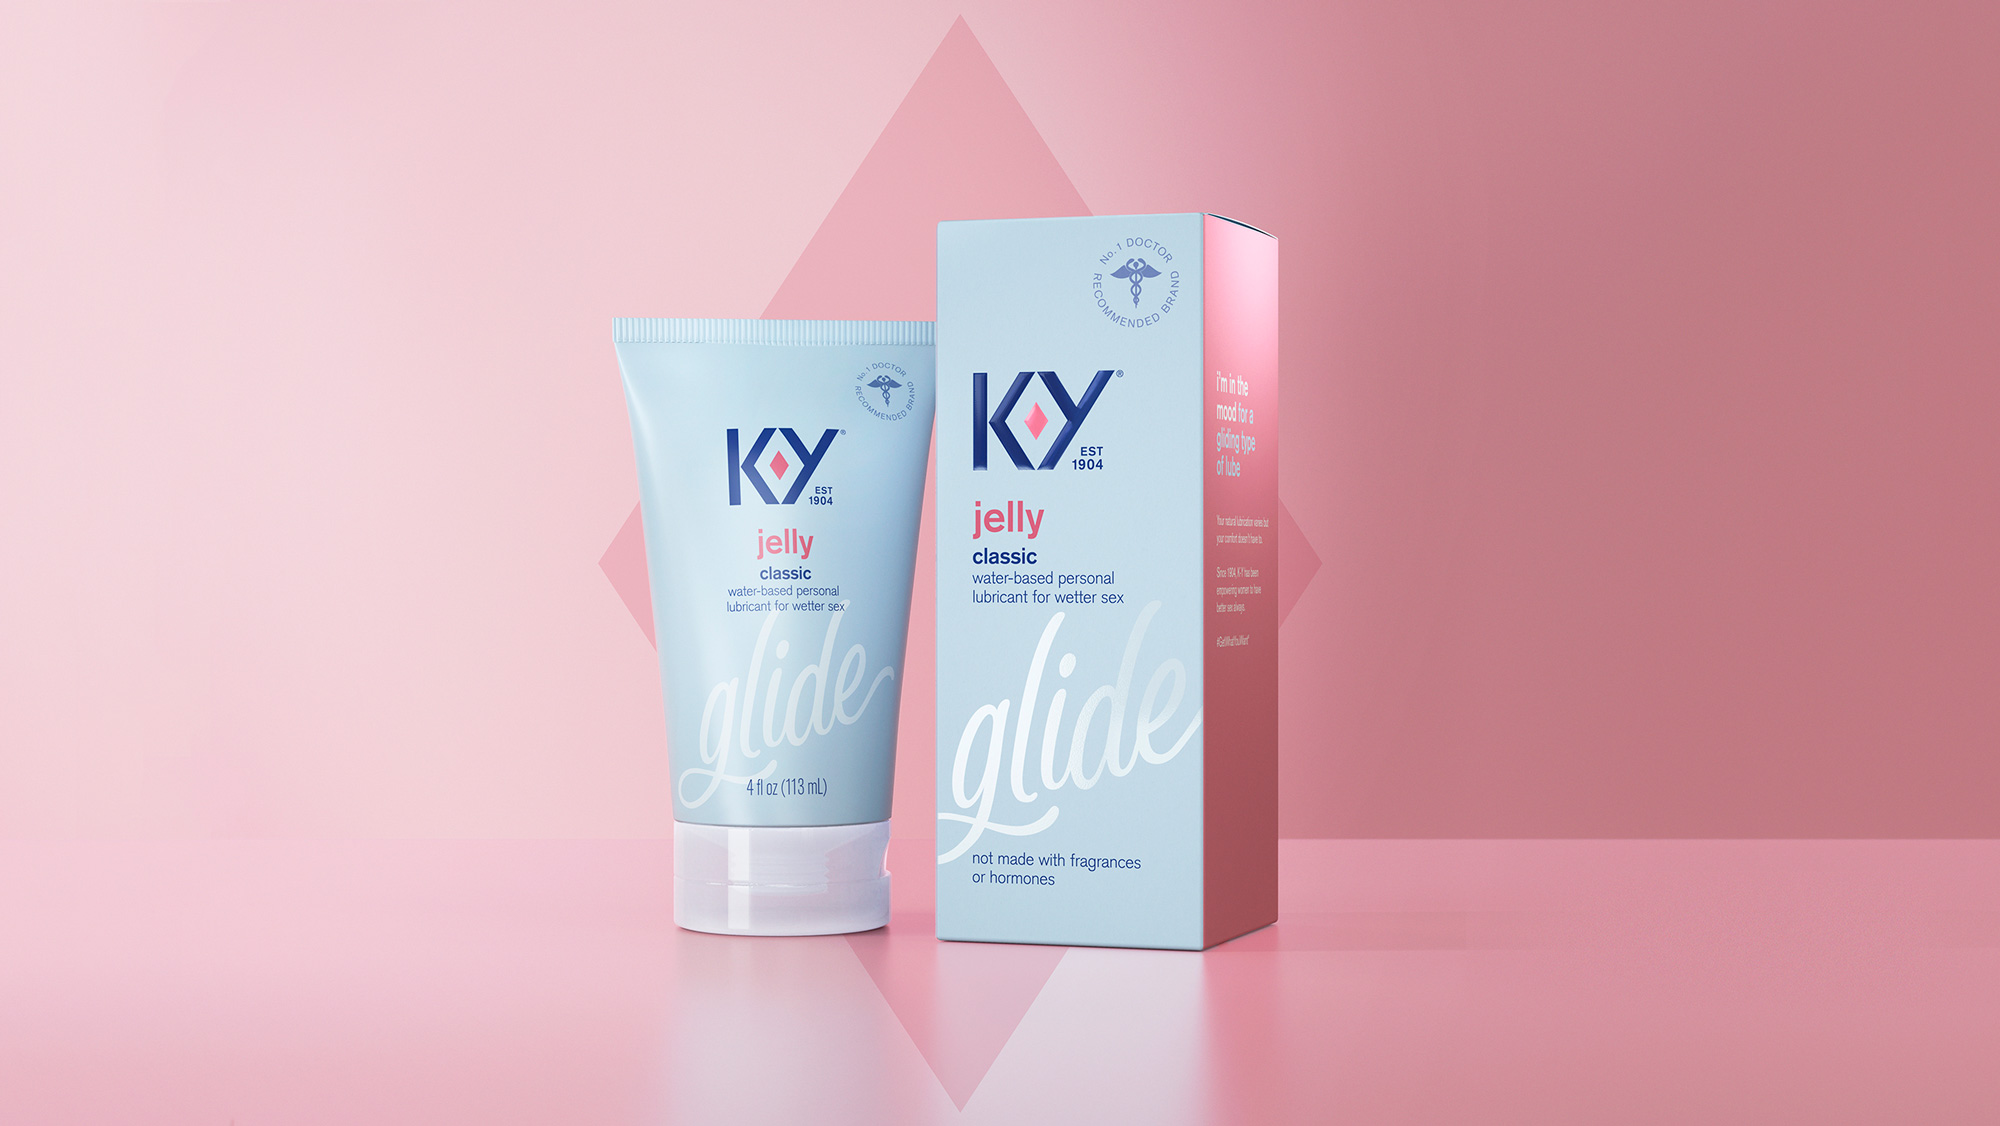 New Logo and Packaging for K-Y by Design Bridge